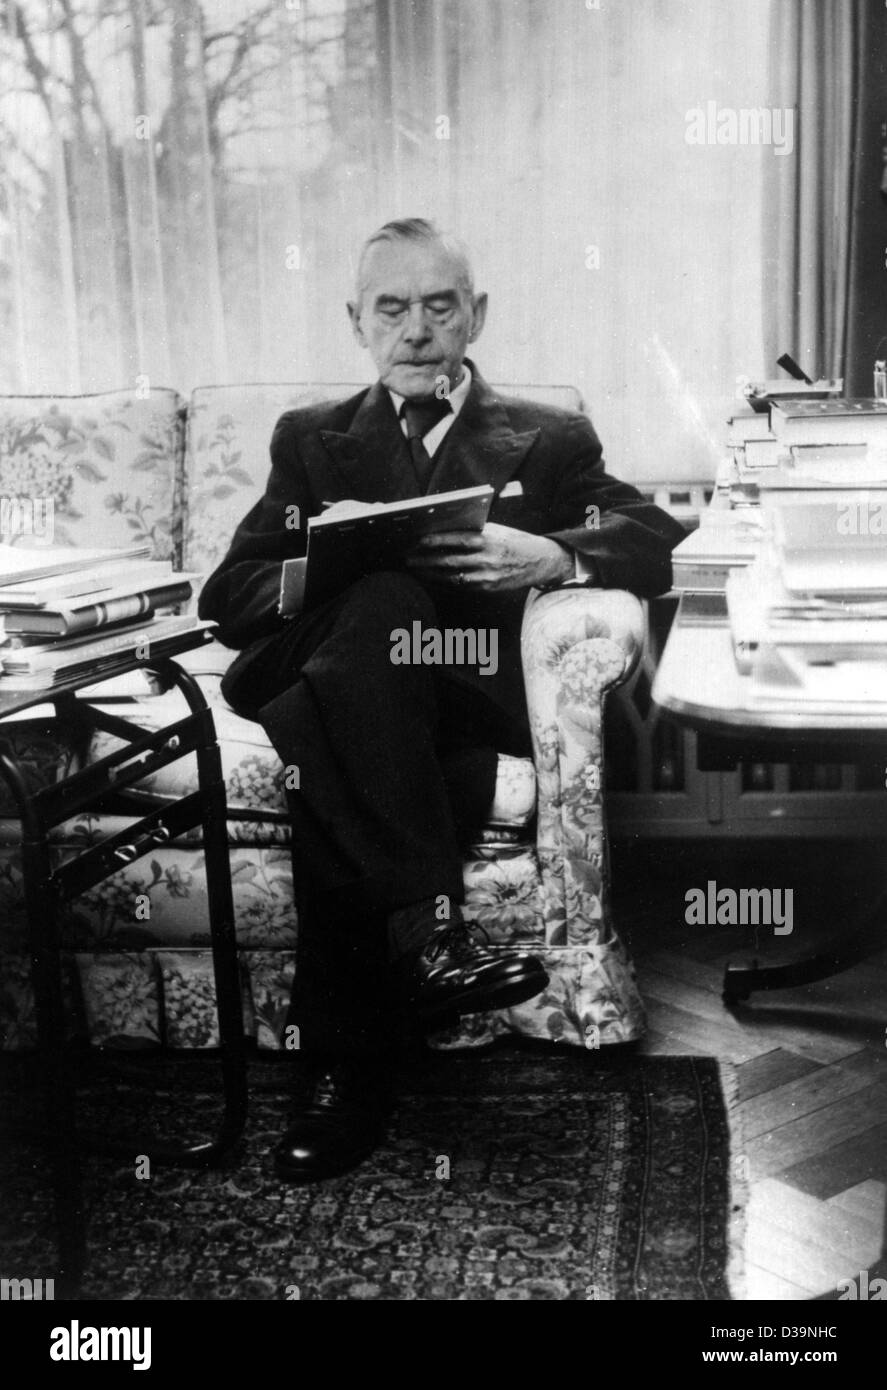 (dpa) - German author and Noble Prize winner Thomas Mann, photographed in his home in Kilchberg near Zurich in 1955. His first novel 'Buddenbrooks' (1901) made him world-famous. Other important works are 'Death in Venice' (1912), 'The Magic Mountain' (1924) and 'Confessions of Felix Krull' (1954). H Stock Photo